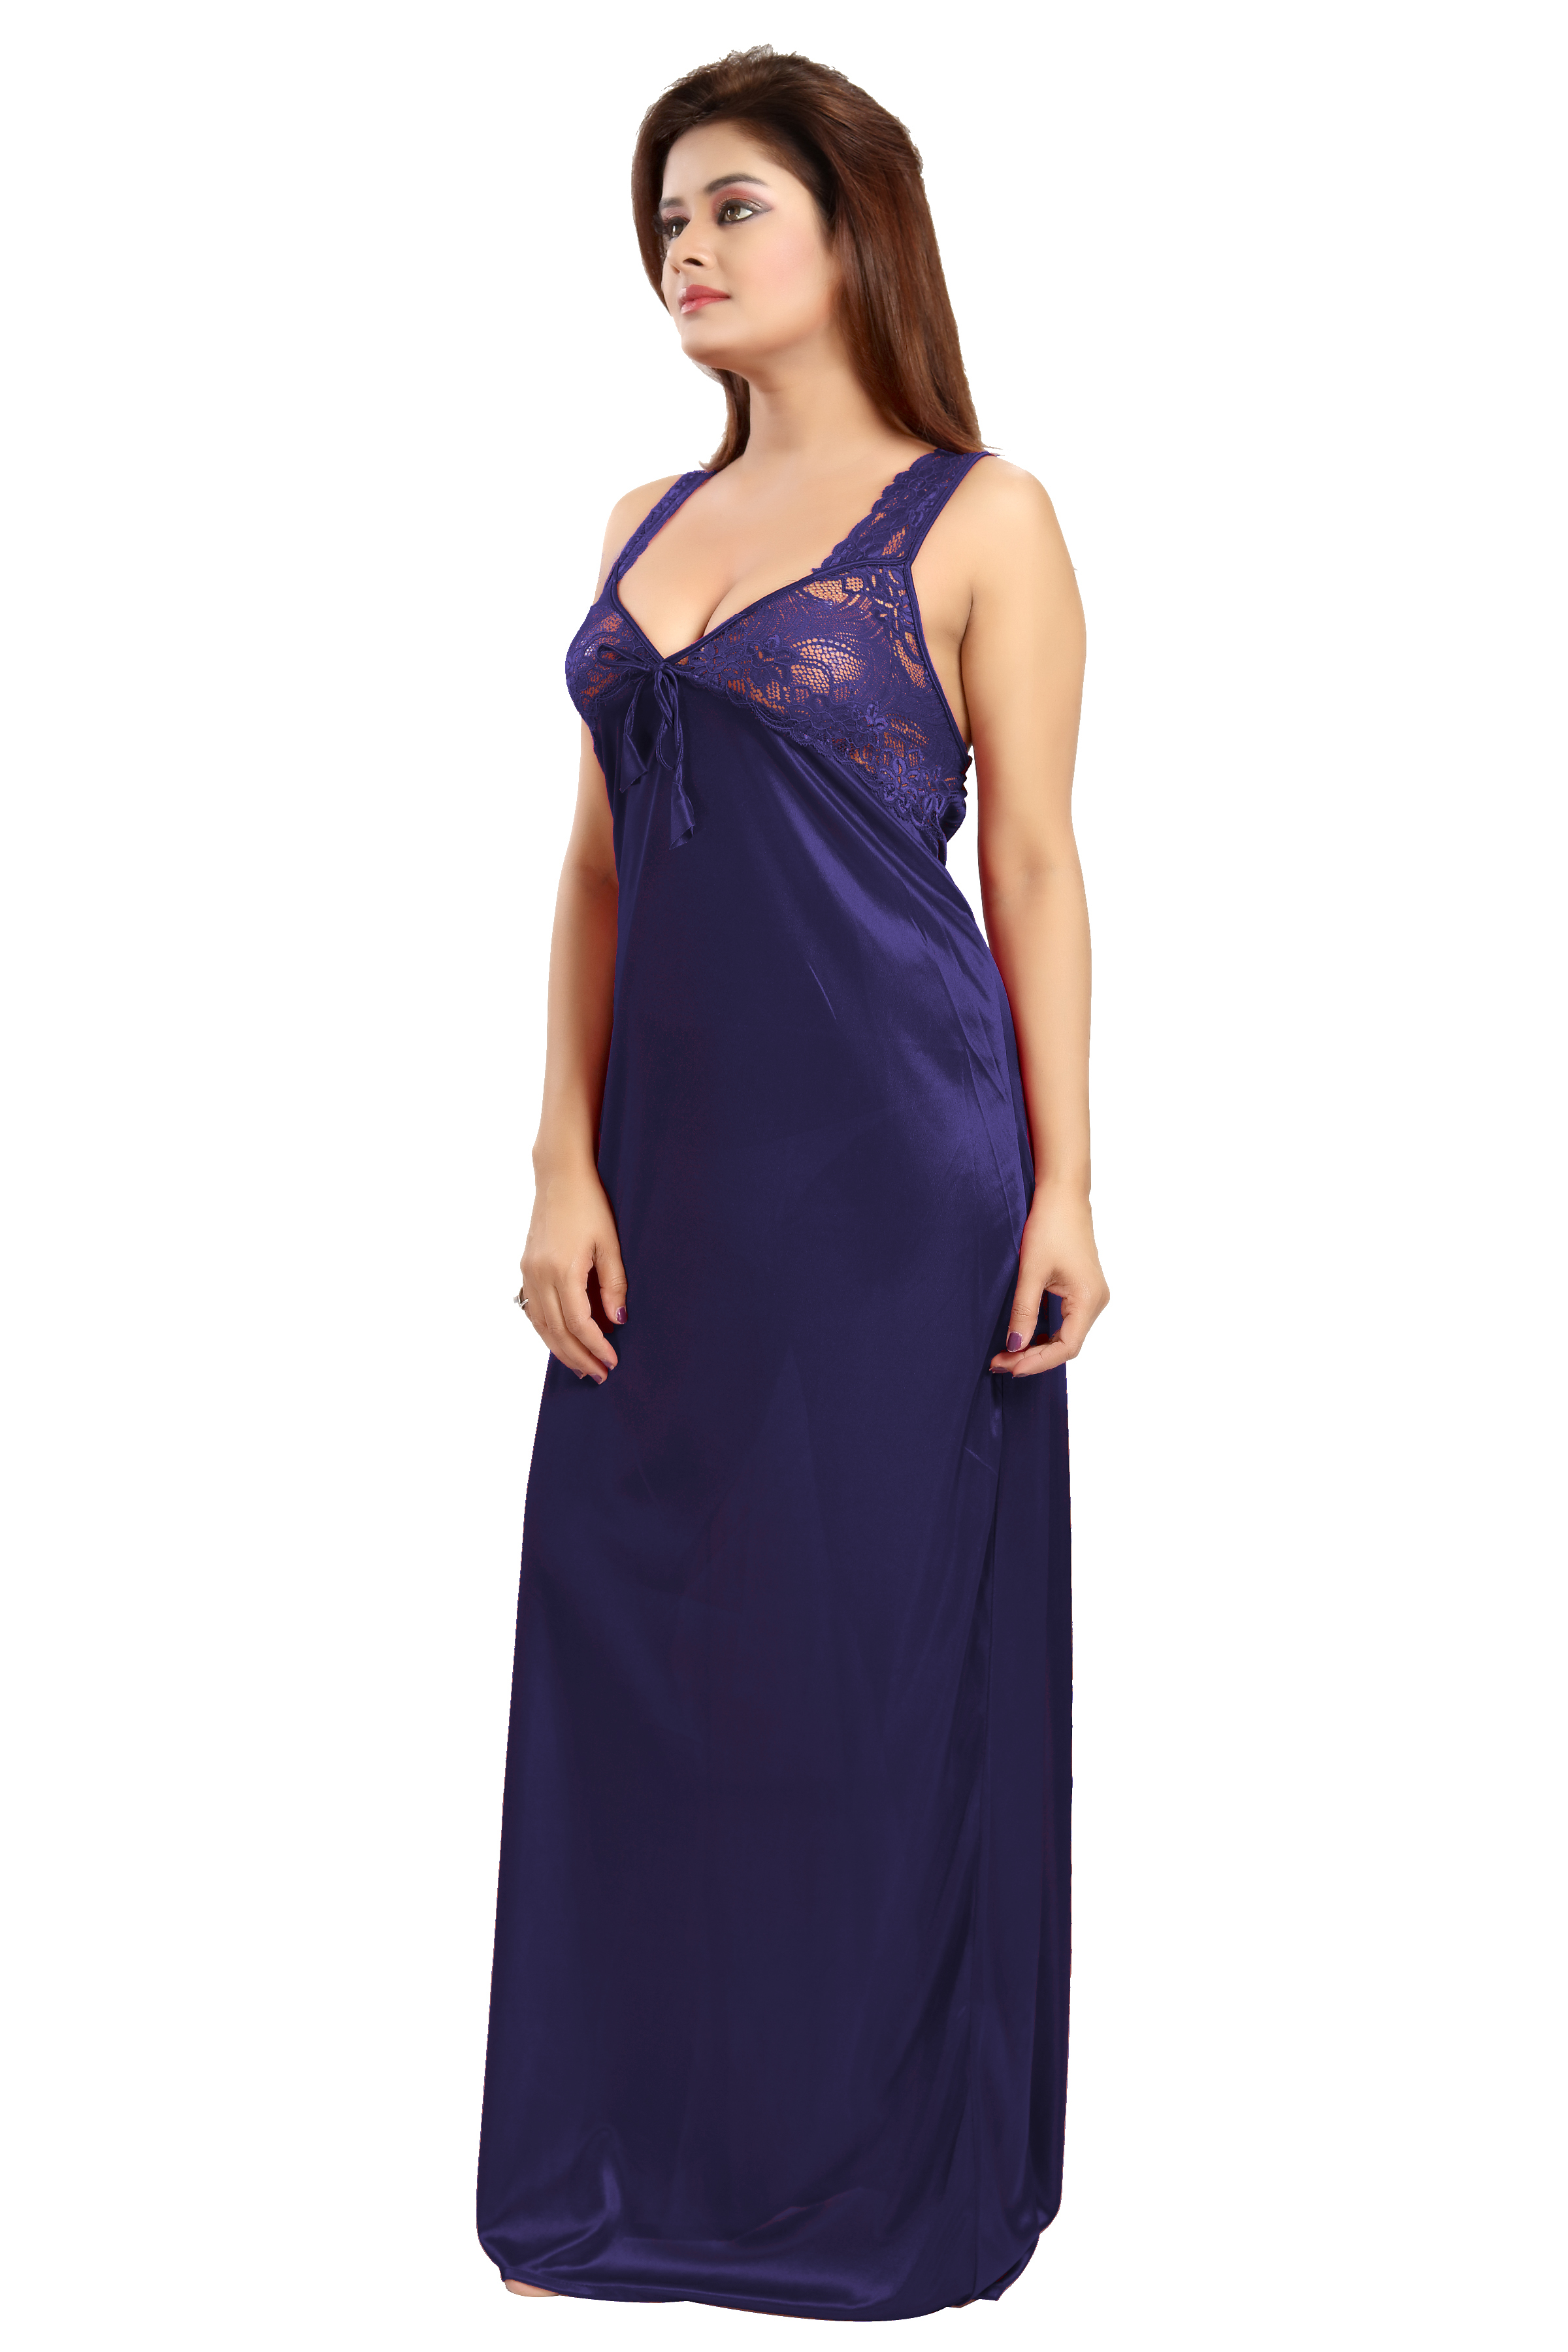 Buy Be You Navy Blue Solid Women Nighty Night Dress Online ₹459 From Shopclues 